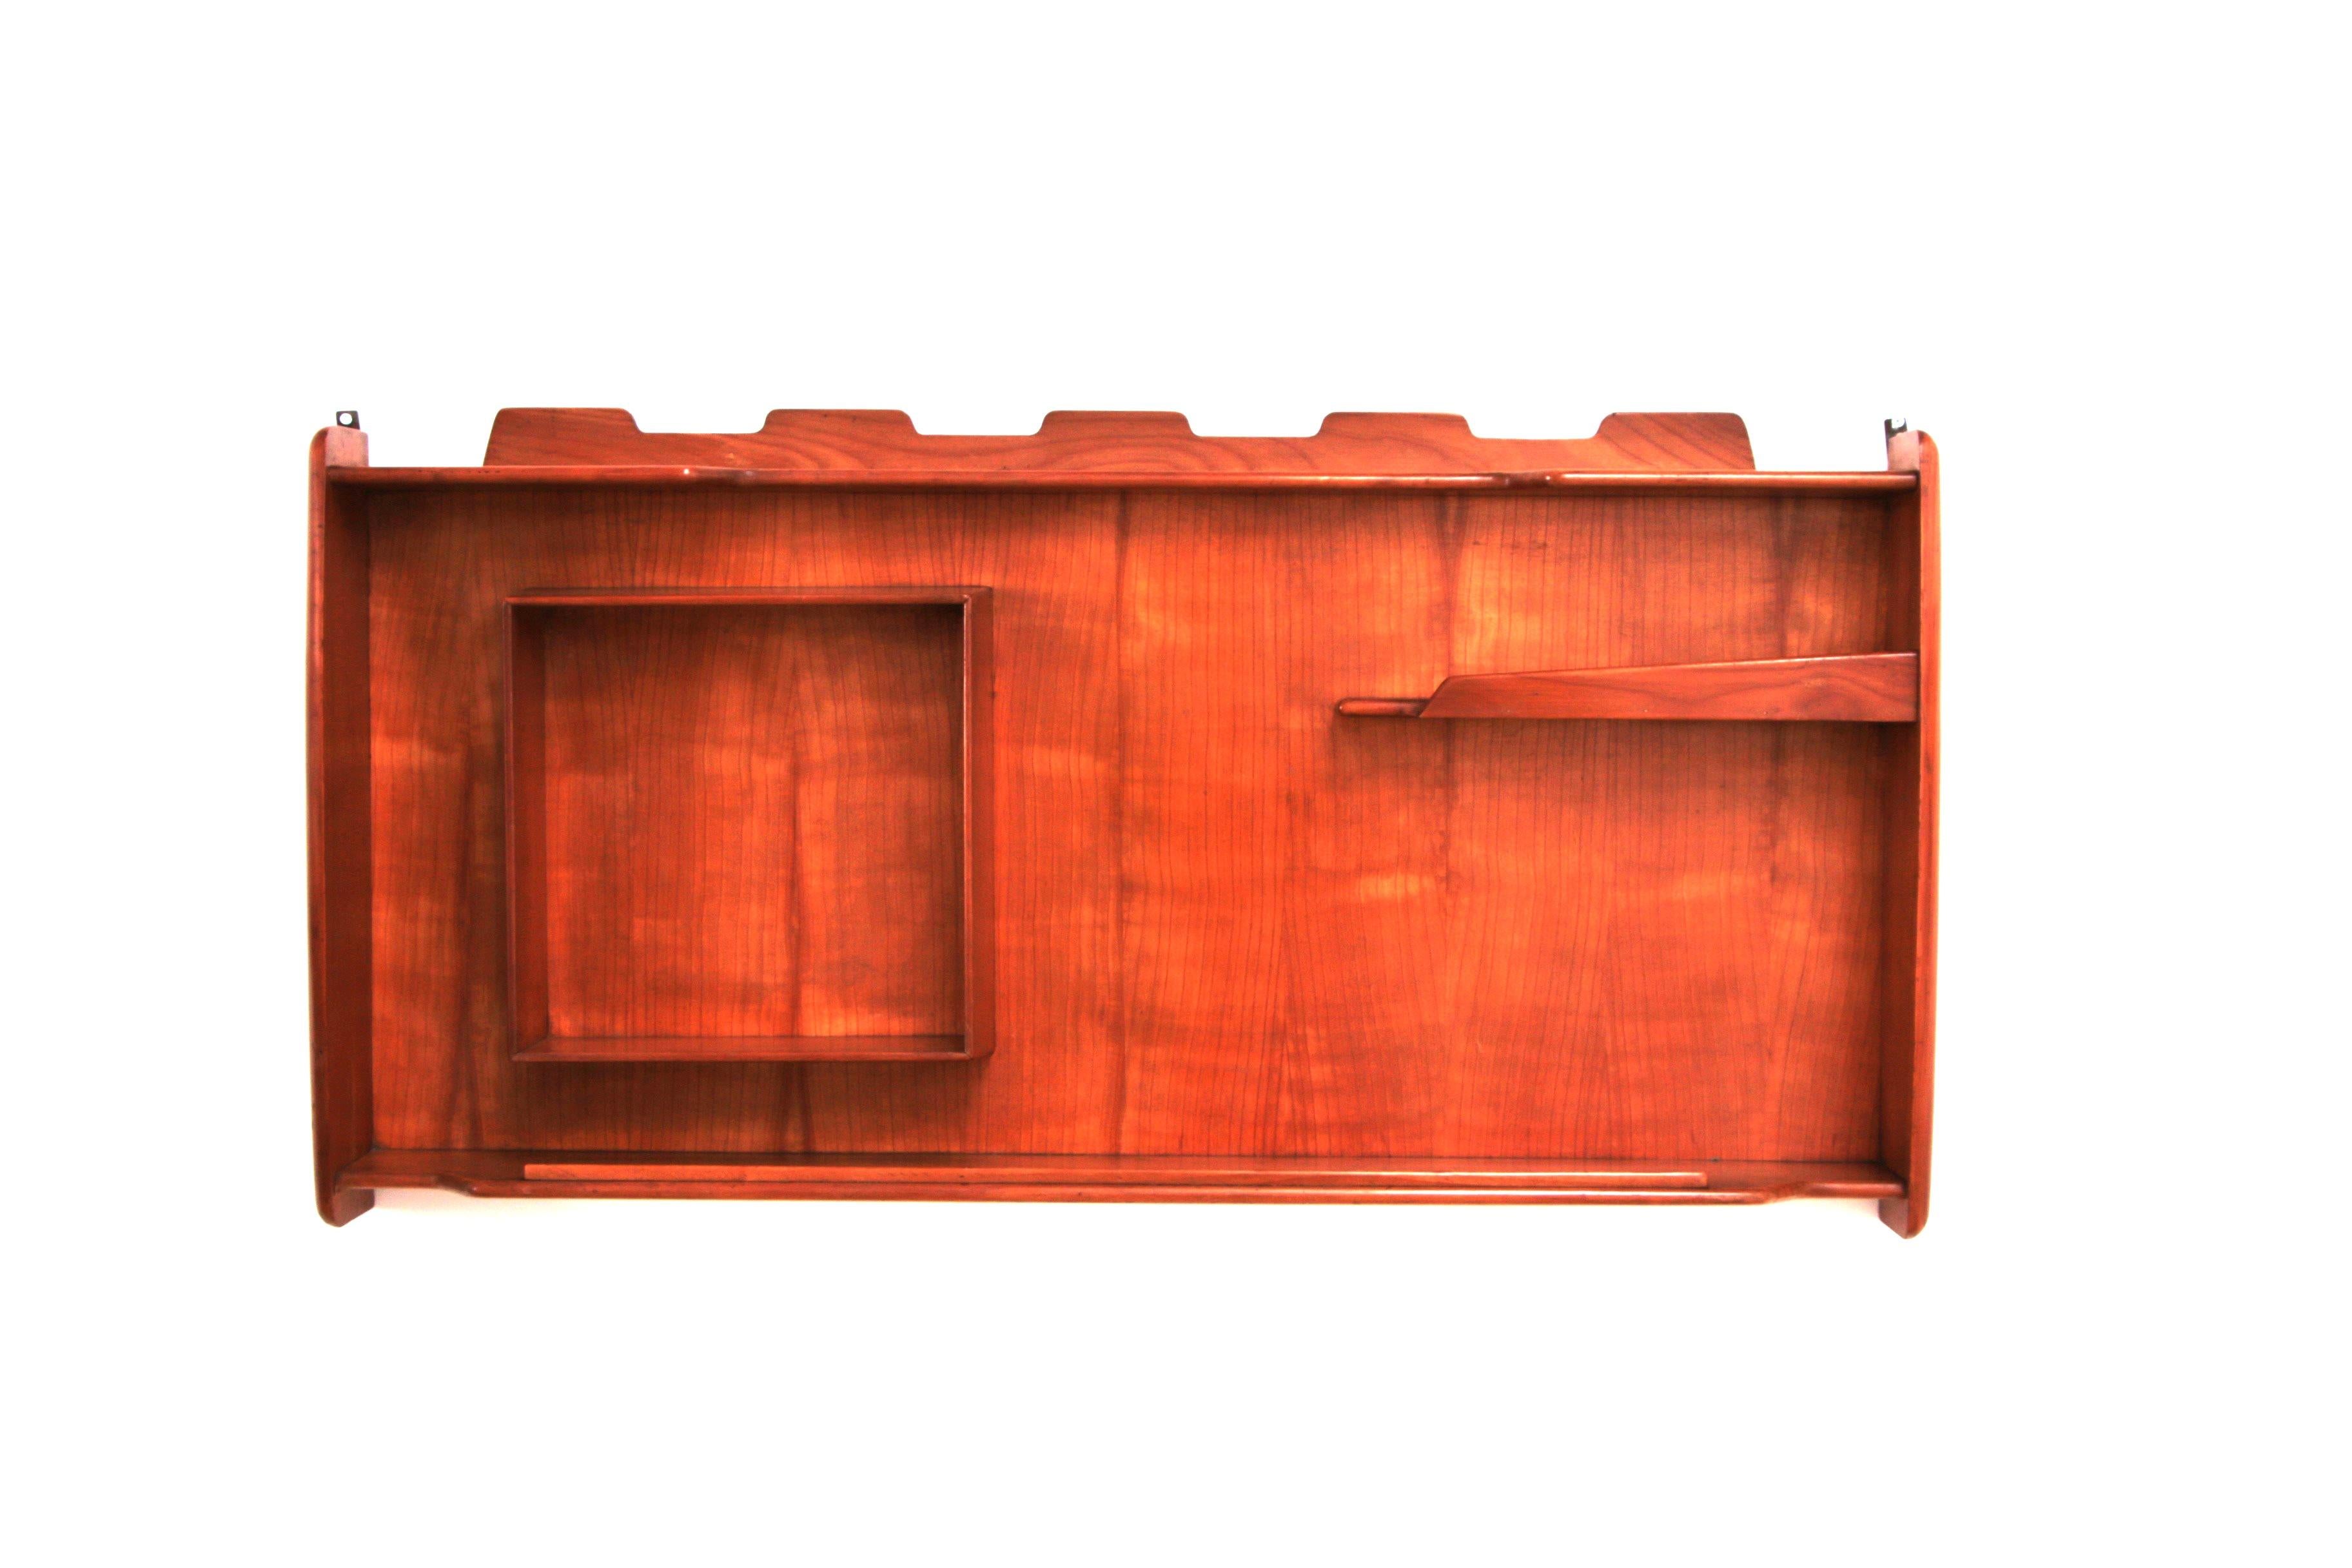 Italian Handmade Walnut wall cabinet from the 1960s.


This is a very beautiful handmade wall cabinet to place beautiful things in.

Beautiful for netsukes, Japanese decorative buttons or perfume bottles, nice small pieces or a plant.

It is made of